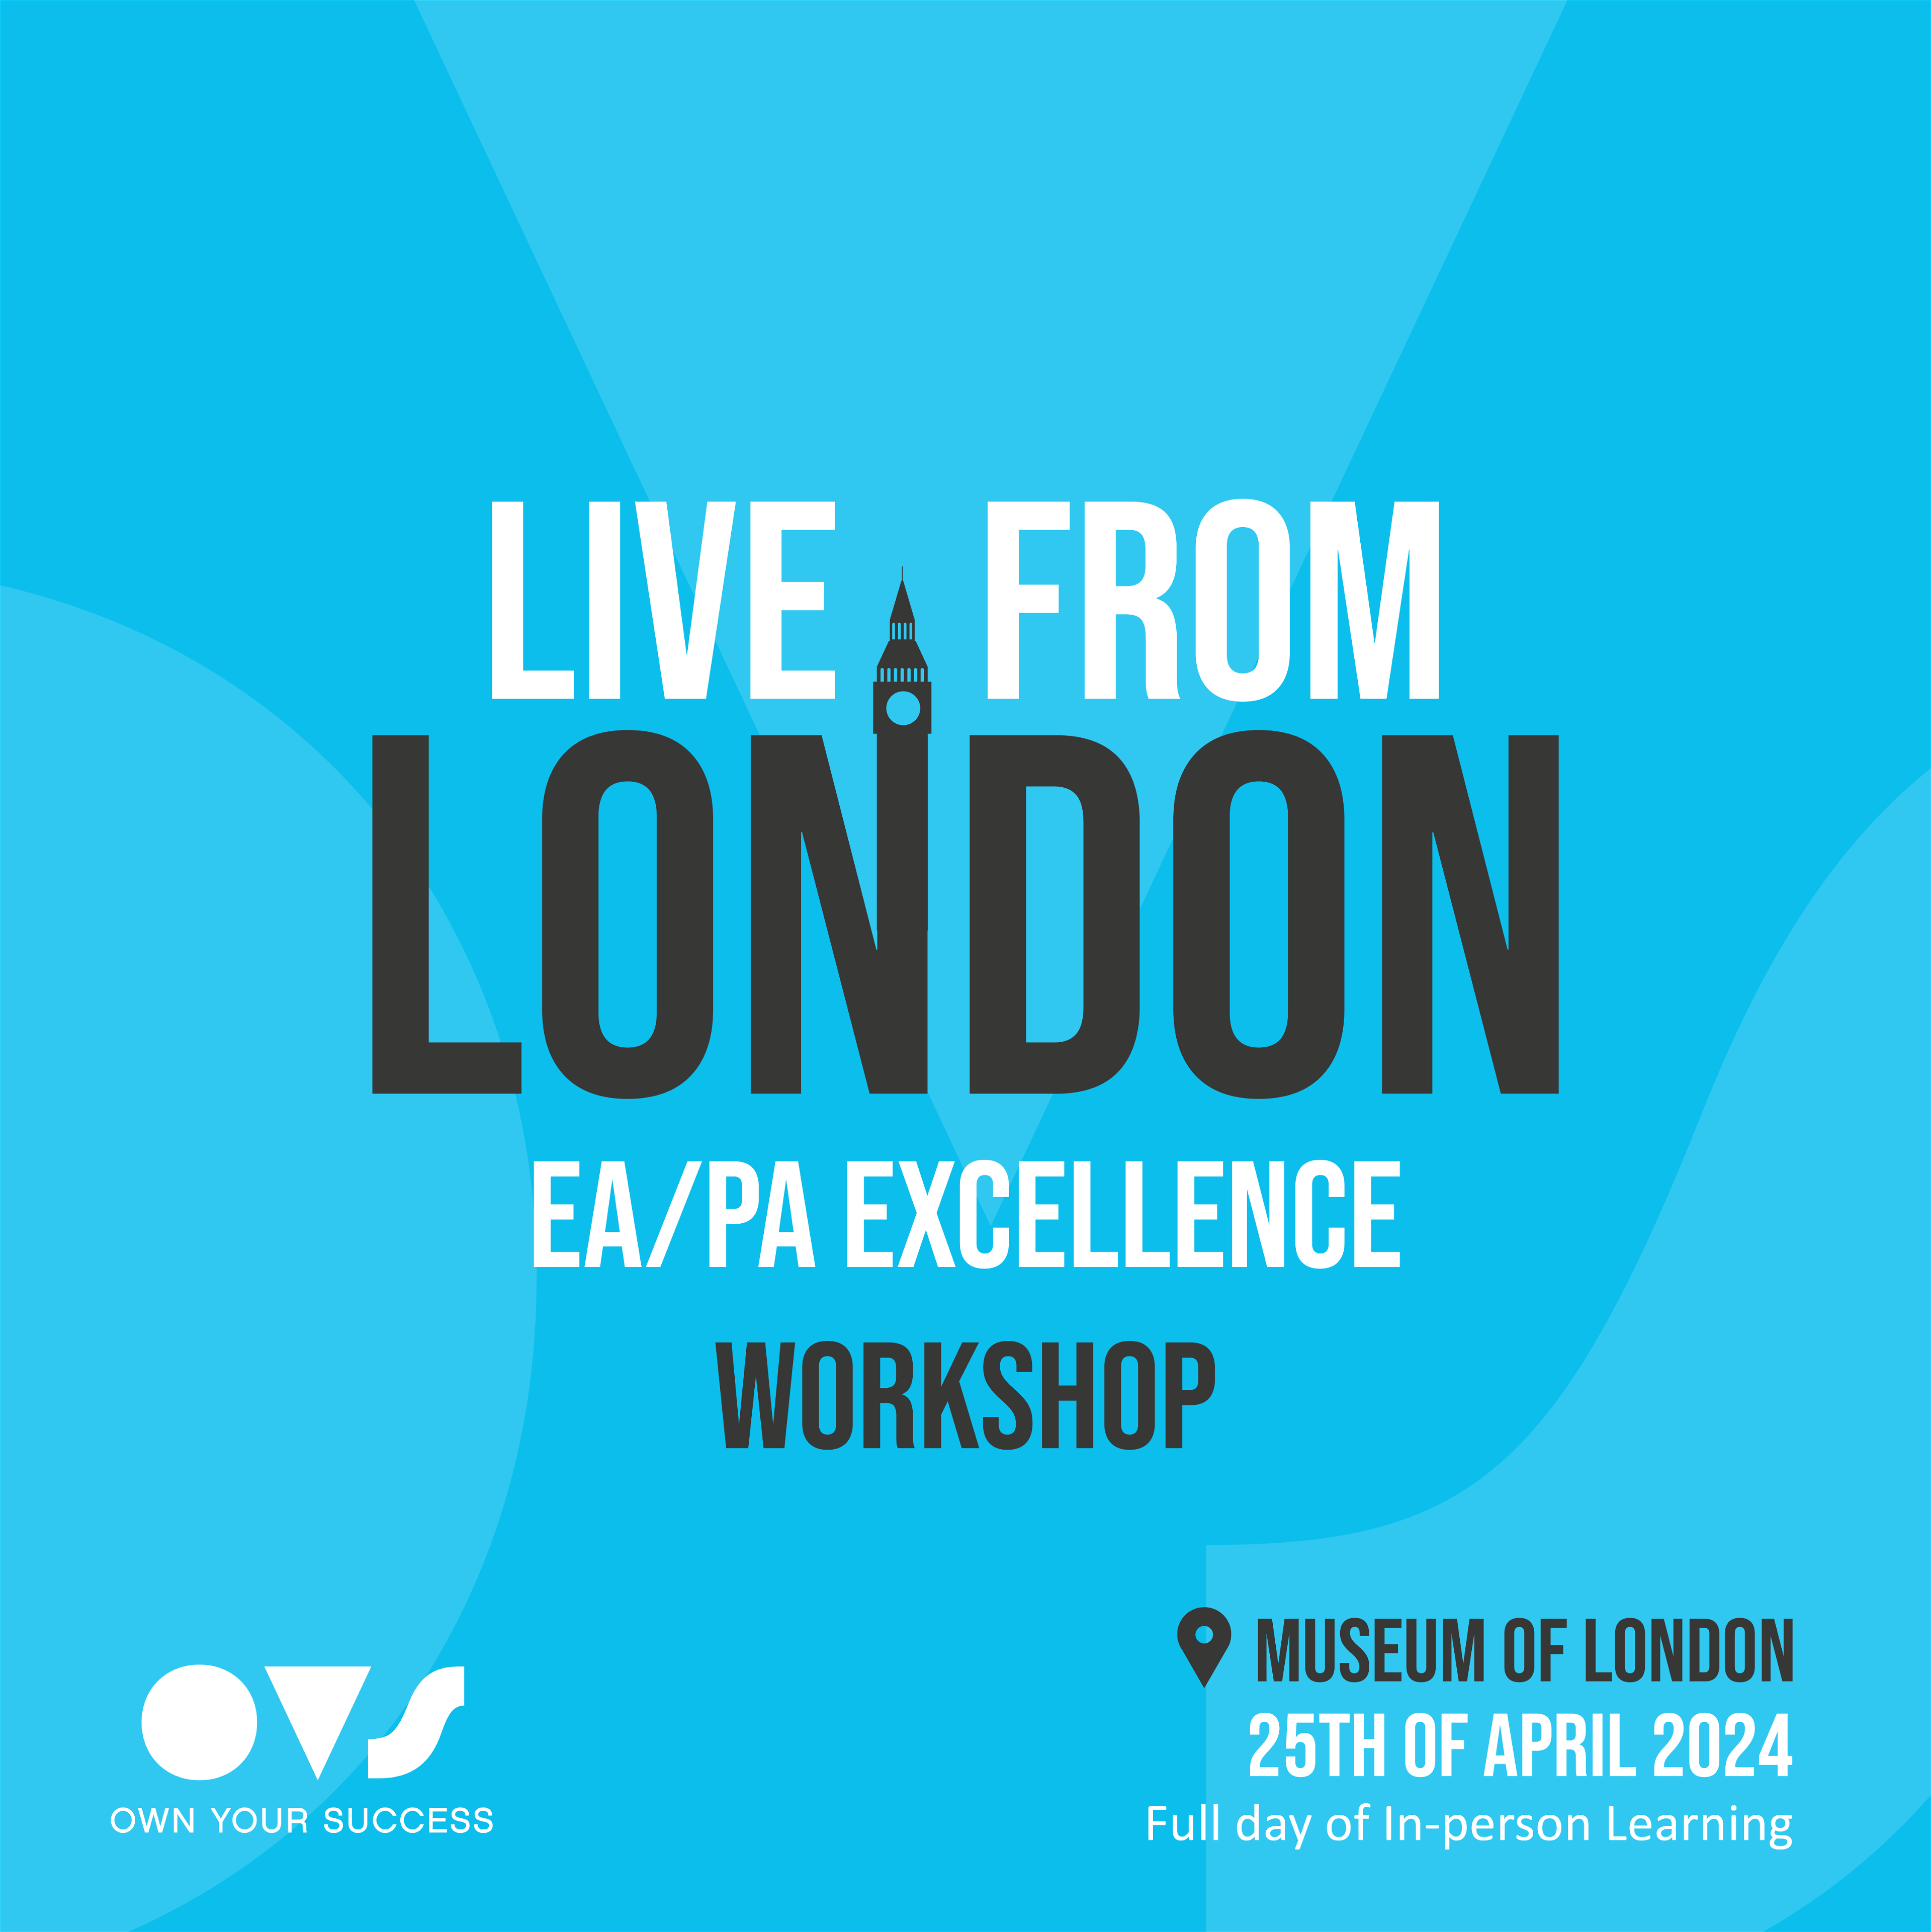 Live from London | EA/PA Excellence Workshop